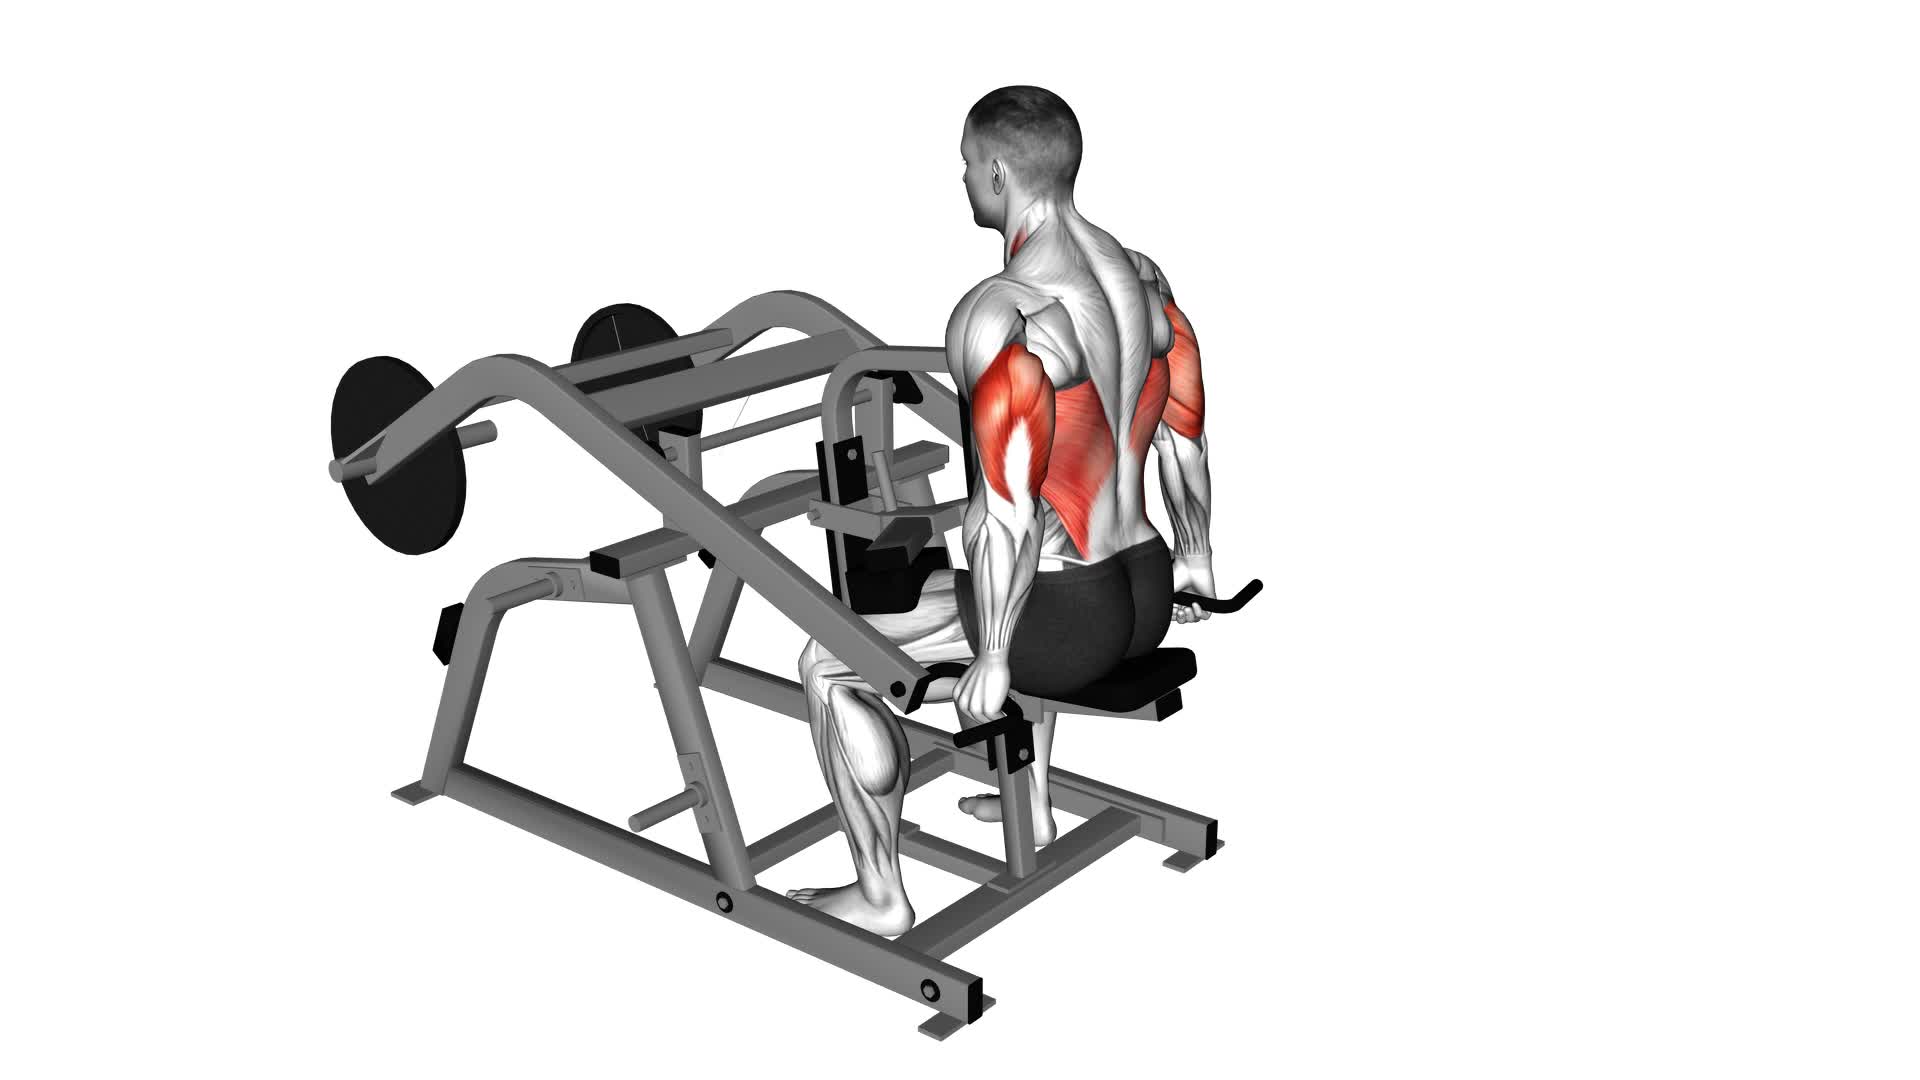 Lever Triceps Dip (Plate Loaded) - Video Exercise Guide & Tips